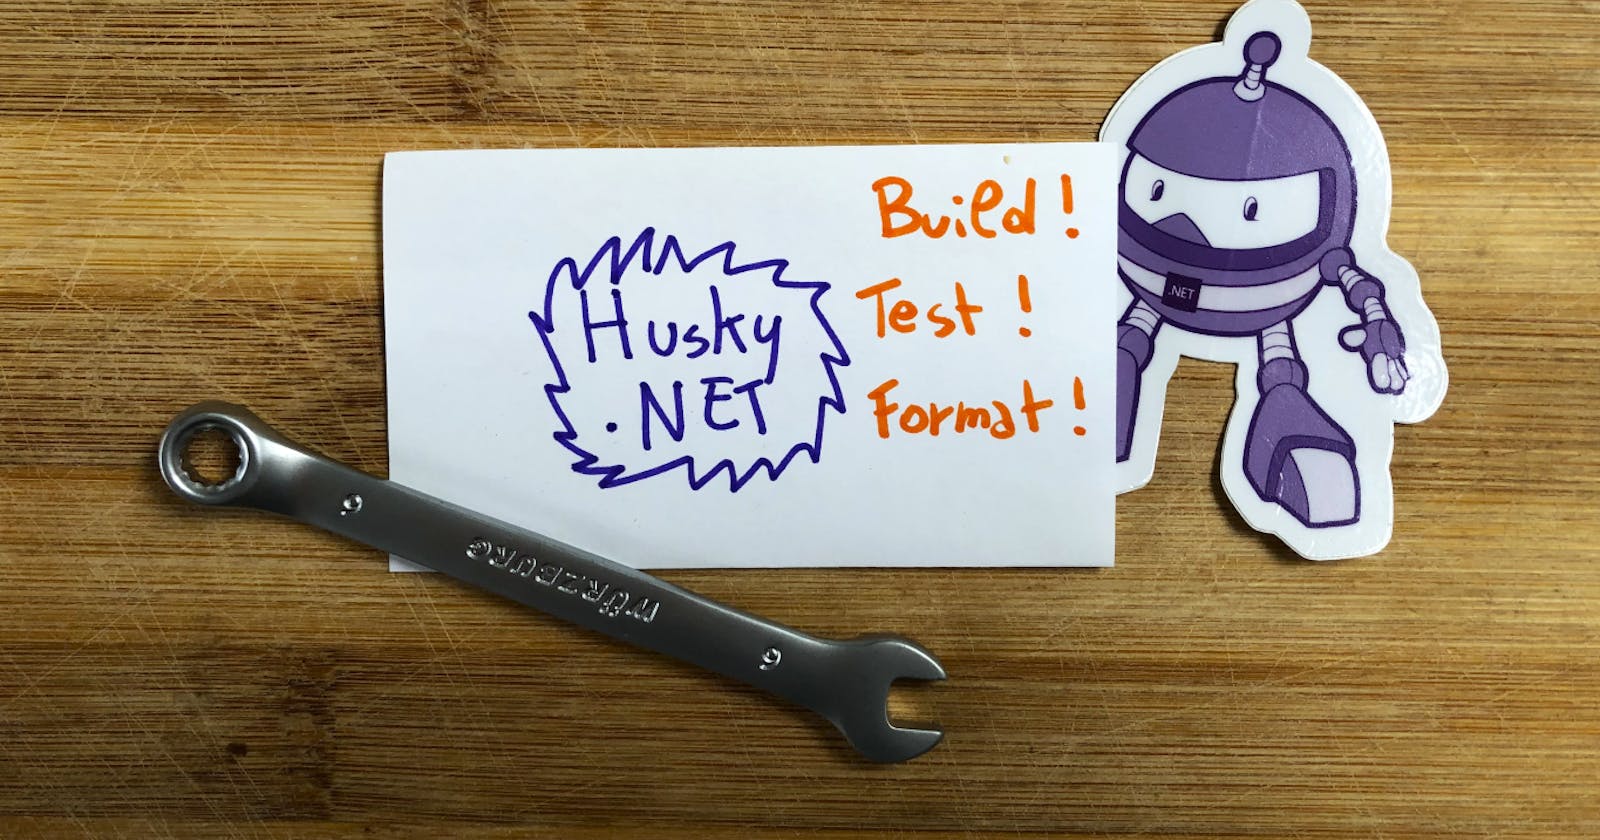 Pre-commit hooks with Husky.NET - build, format, and test your .NET application before a Git commit